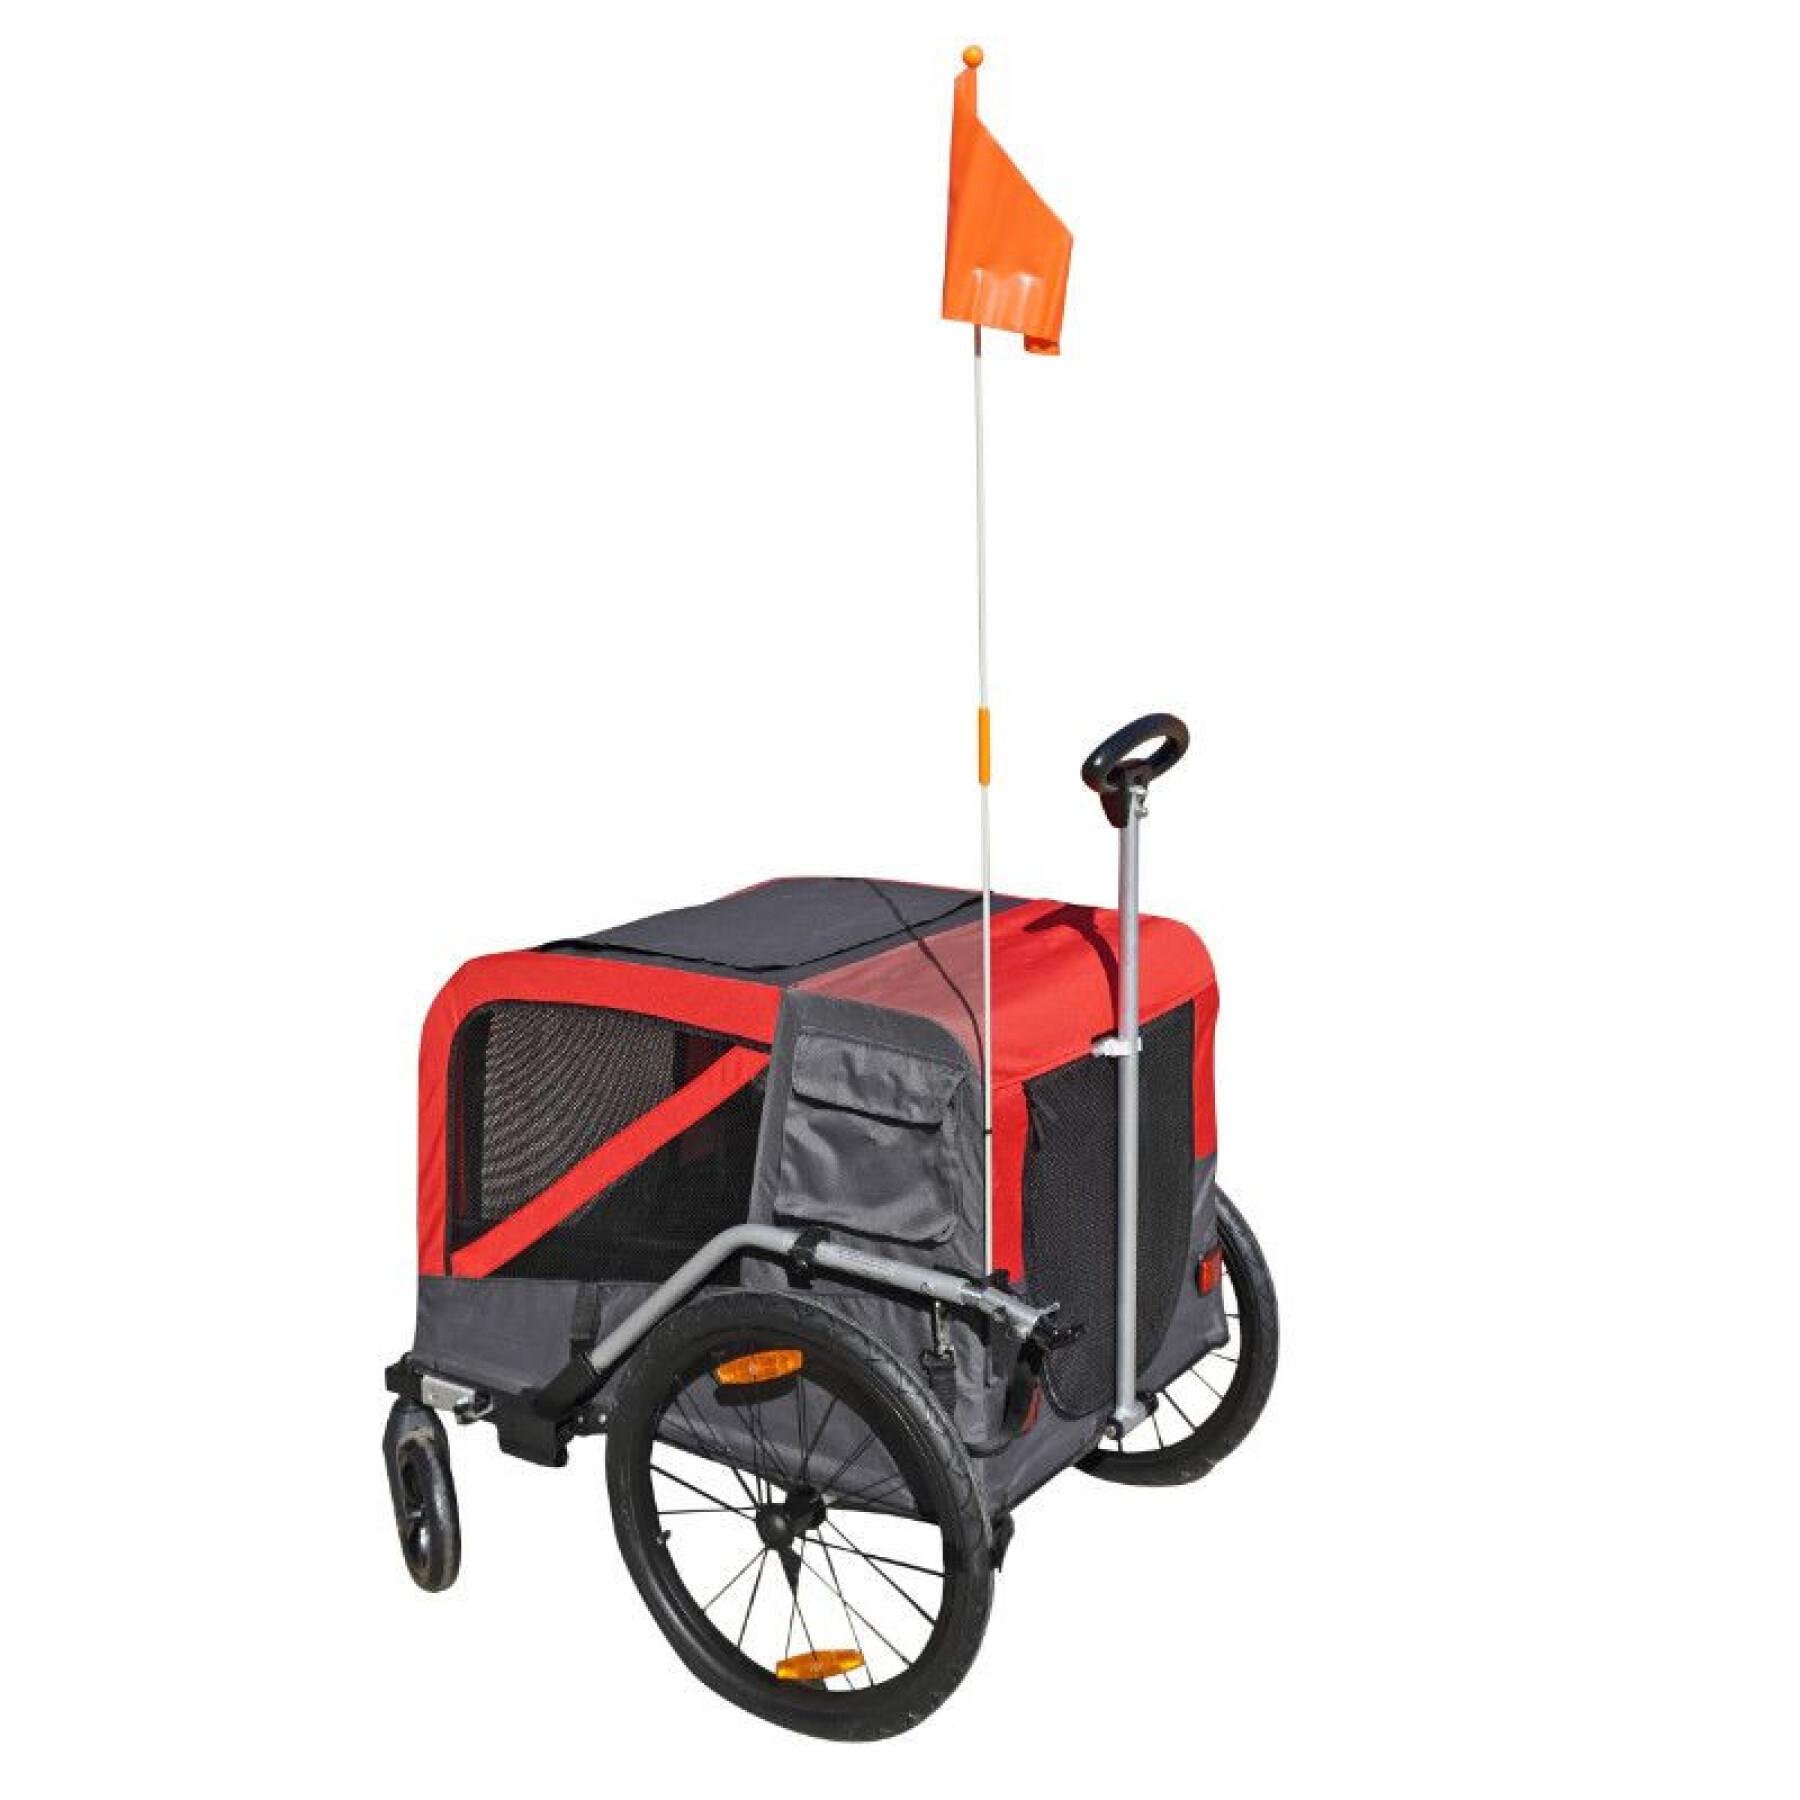 Maxi utility bike trailer with 20" wheels and rear wheel axle fixation - reinforced metal bottom for dog or luggage transport with handle and 2 wheels P2R